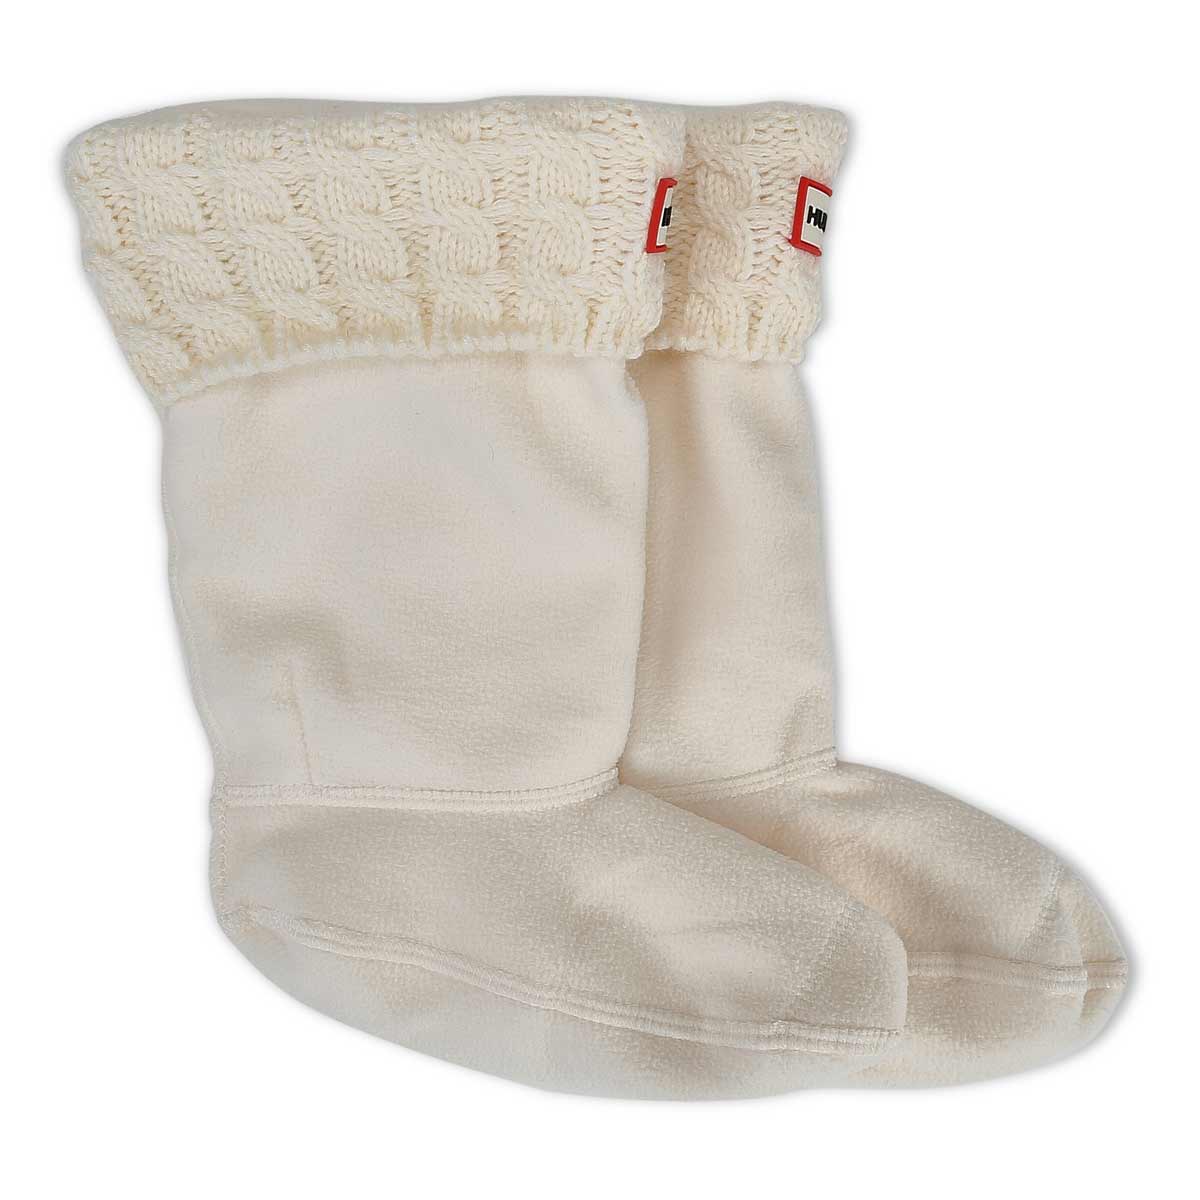 Kids' 6 Stitch Cable Boot Sock - White